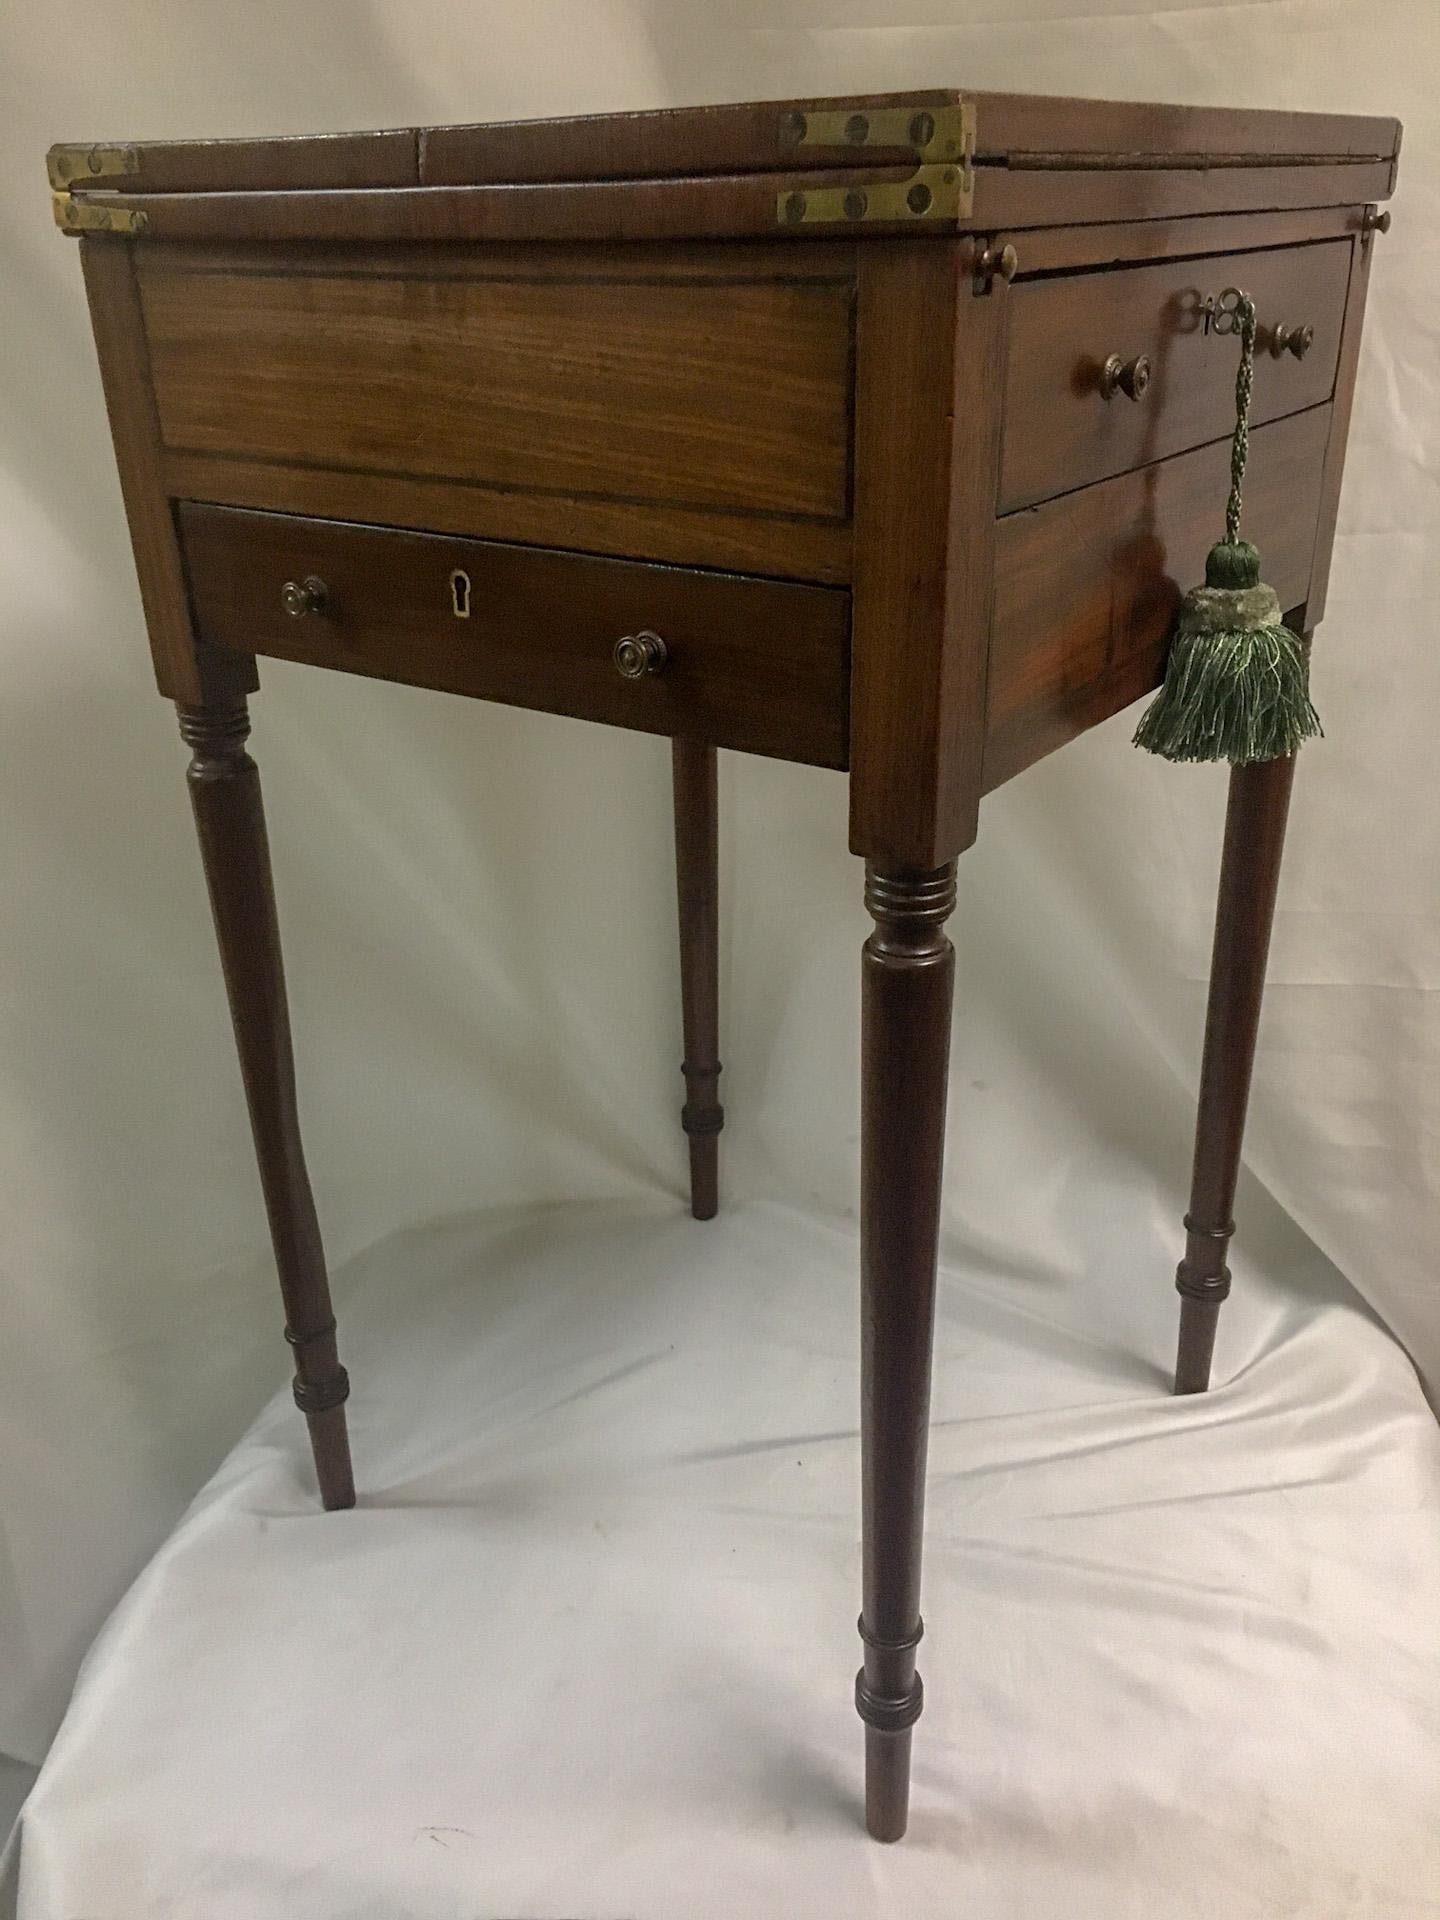 This unusual American mahogany petite sized writing table features two flip-top panels with leather inserts and two compartmentalized drawers, one in front and one on the side. The drawers are dovetailed, the brass hardware is original and the